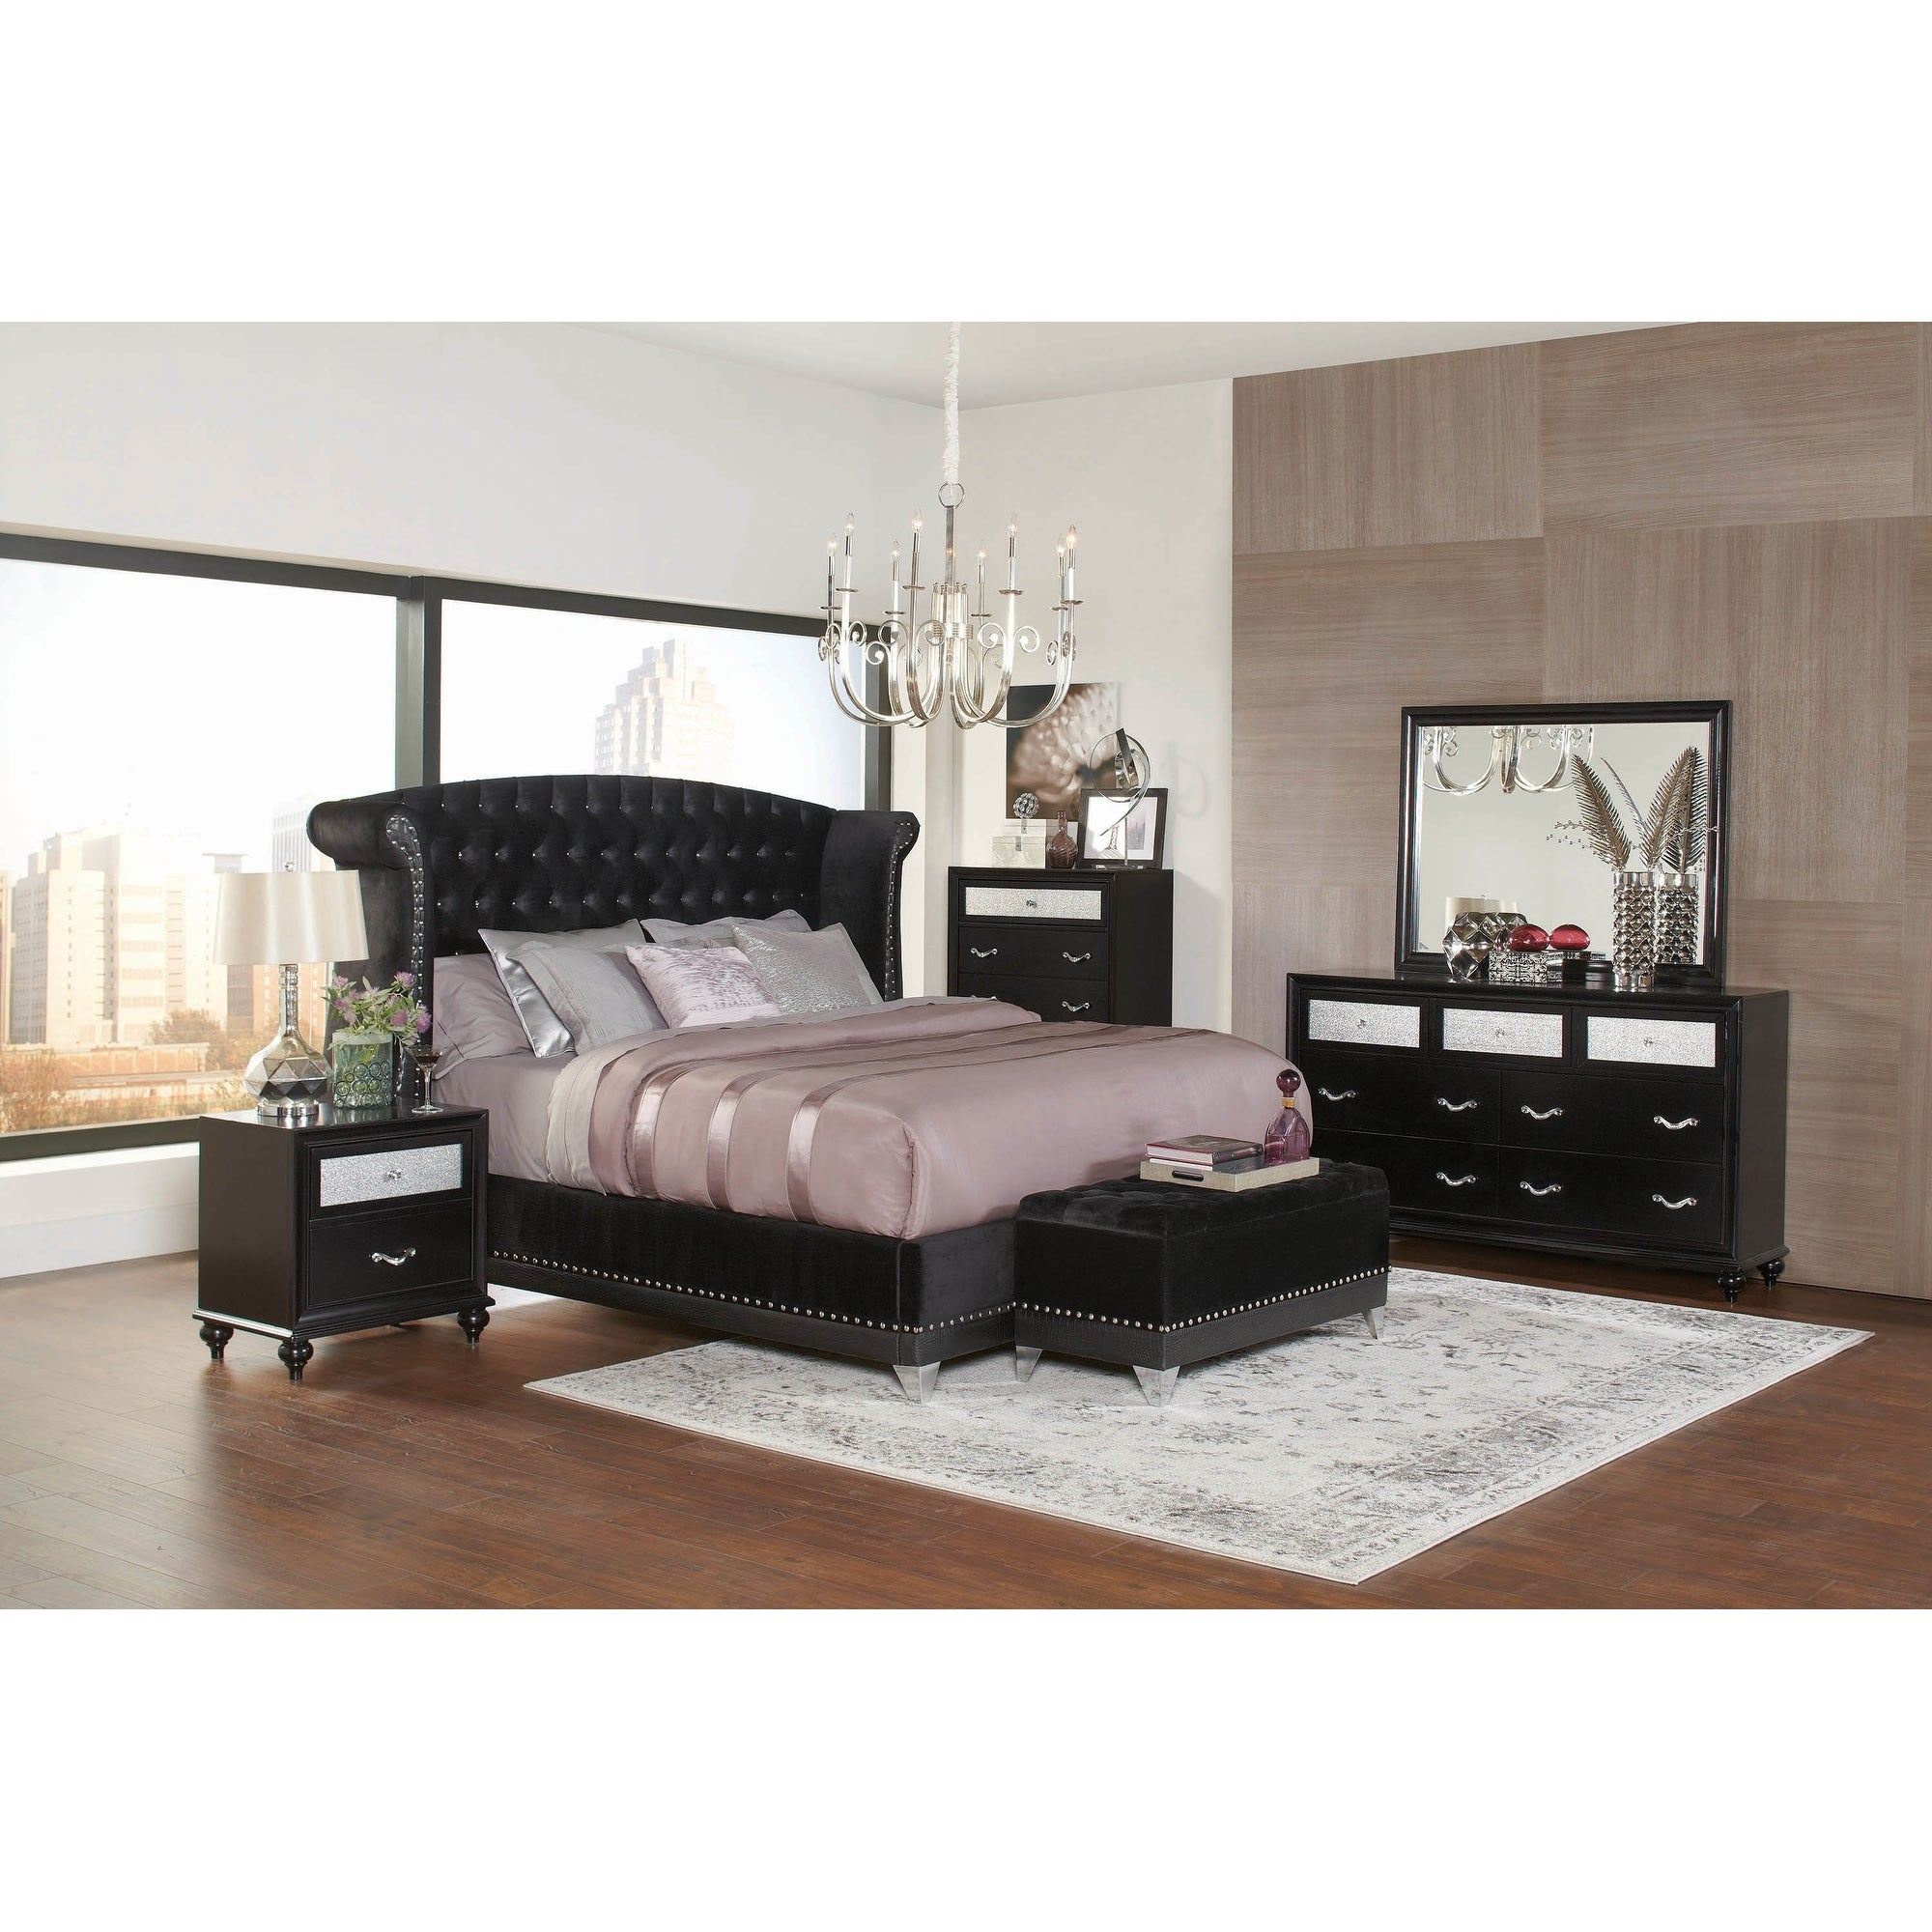 Tamsin Black And Metallic 3 Piece Platform Bedroom Set With Dresser throughout sizing 2000 X 2000